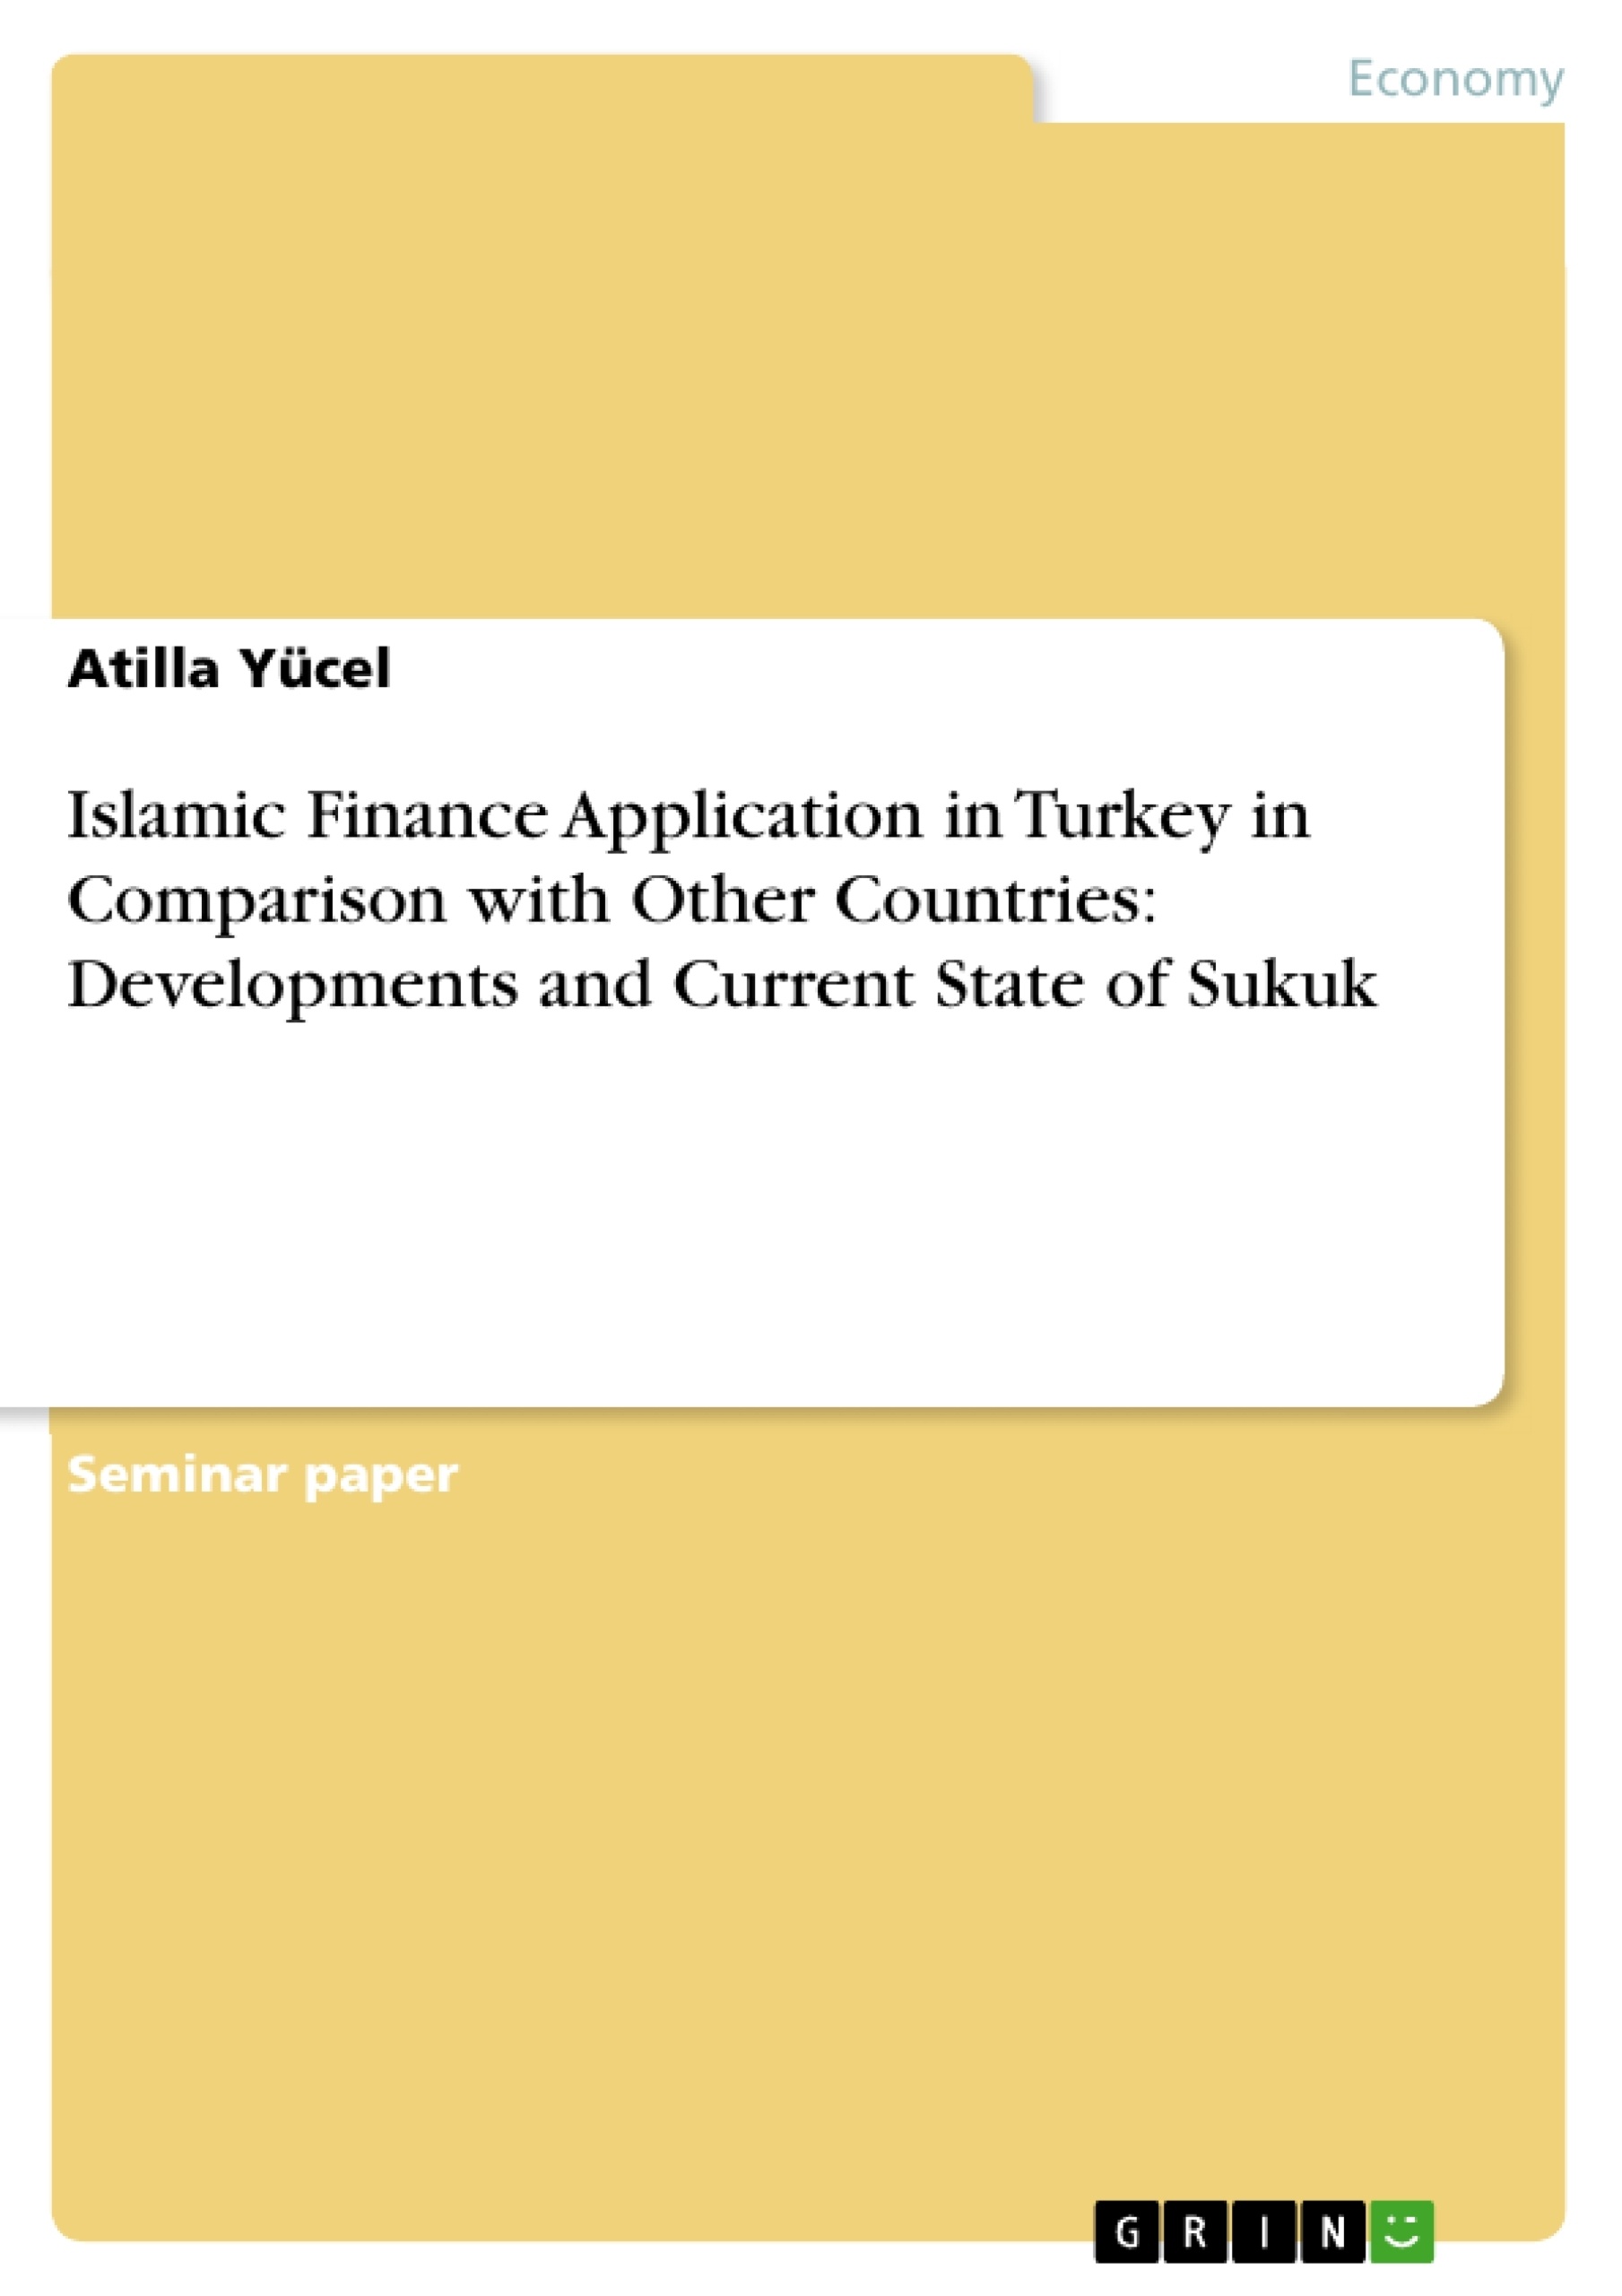 Title: Islamic Finance Application in Turkey in Comparison with Other Countries: Developments and Current State of Sukuk